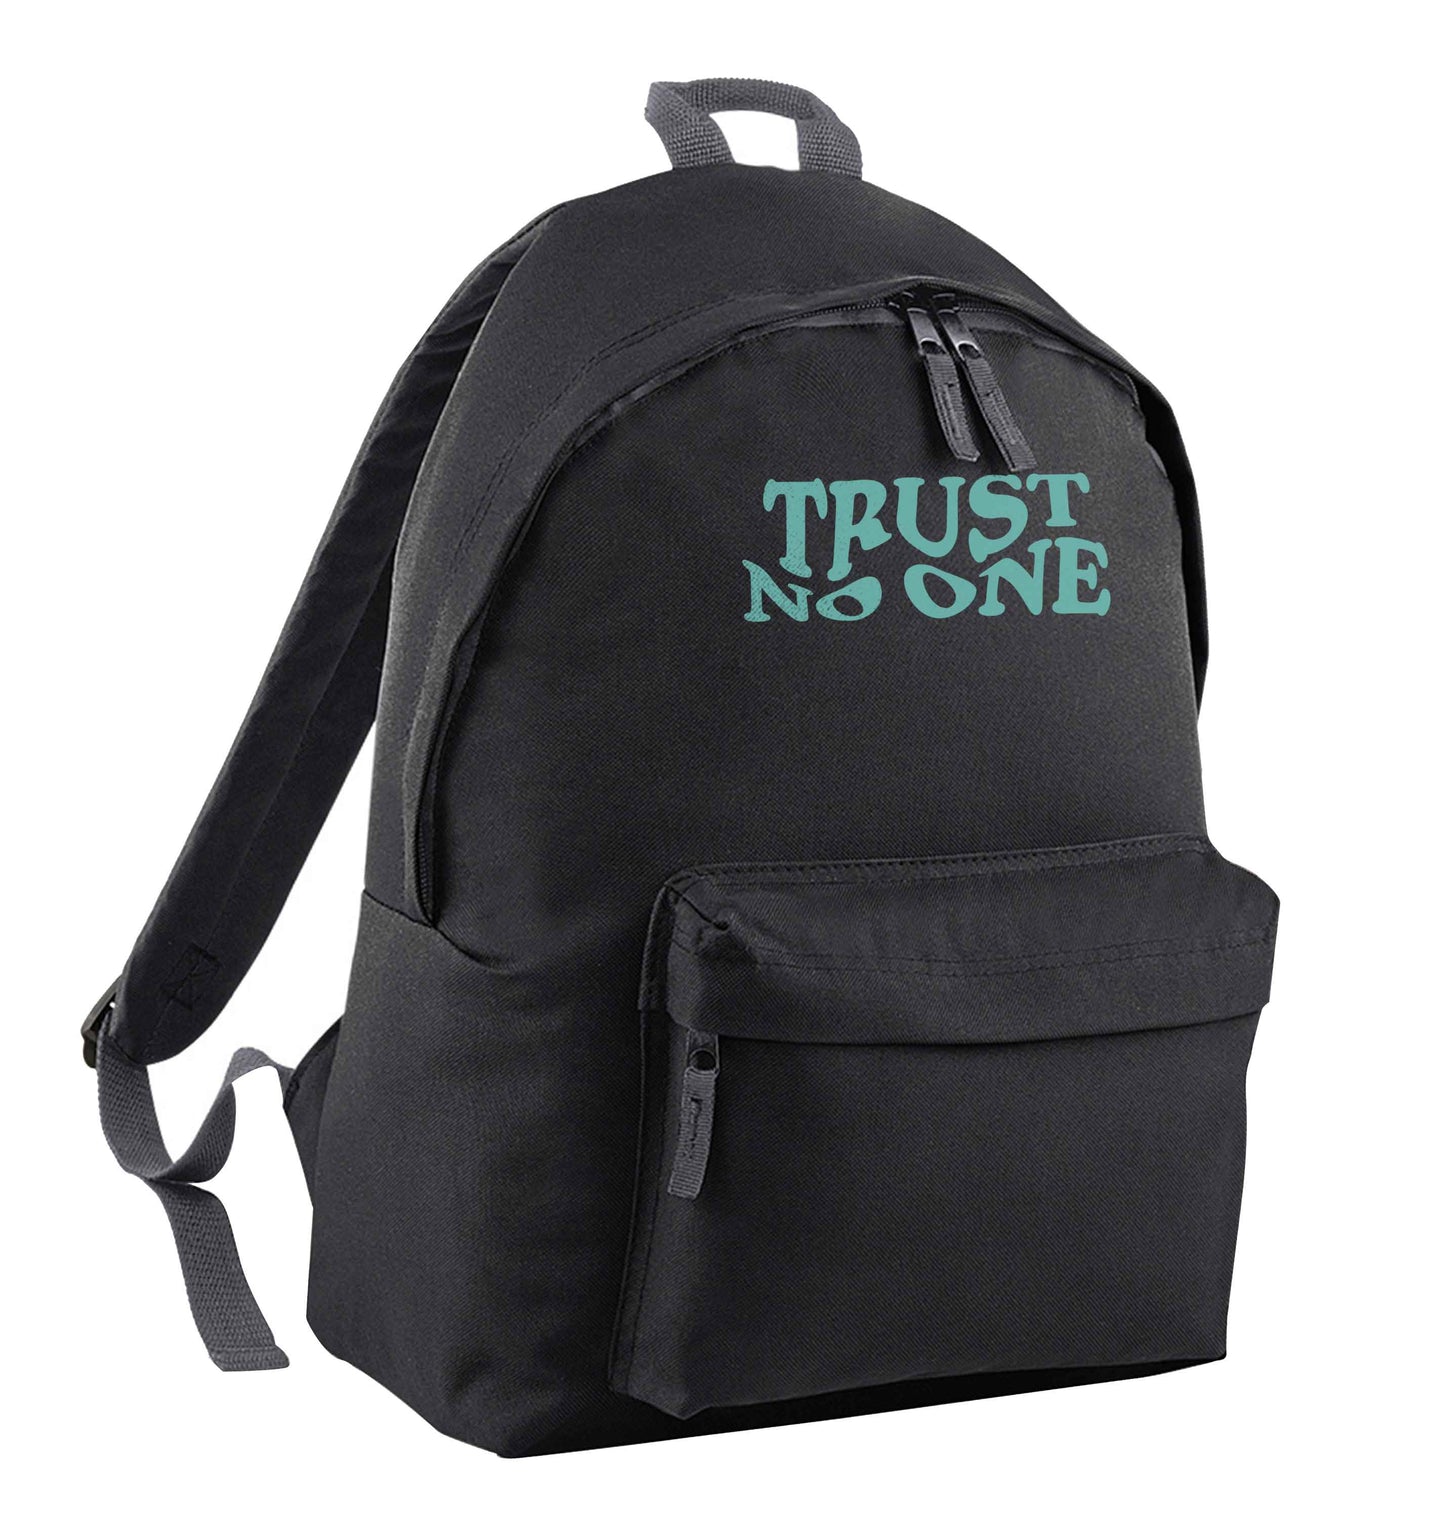 Trust no one black adults backpack